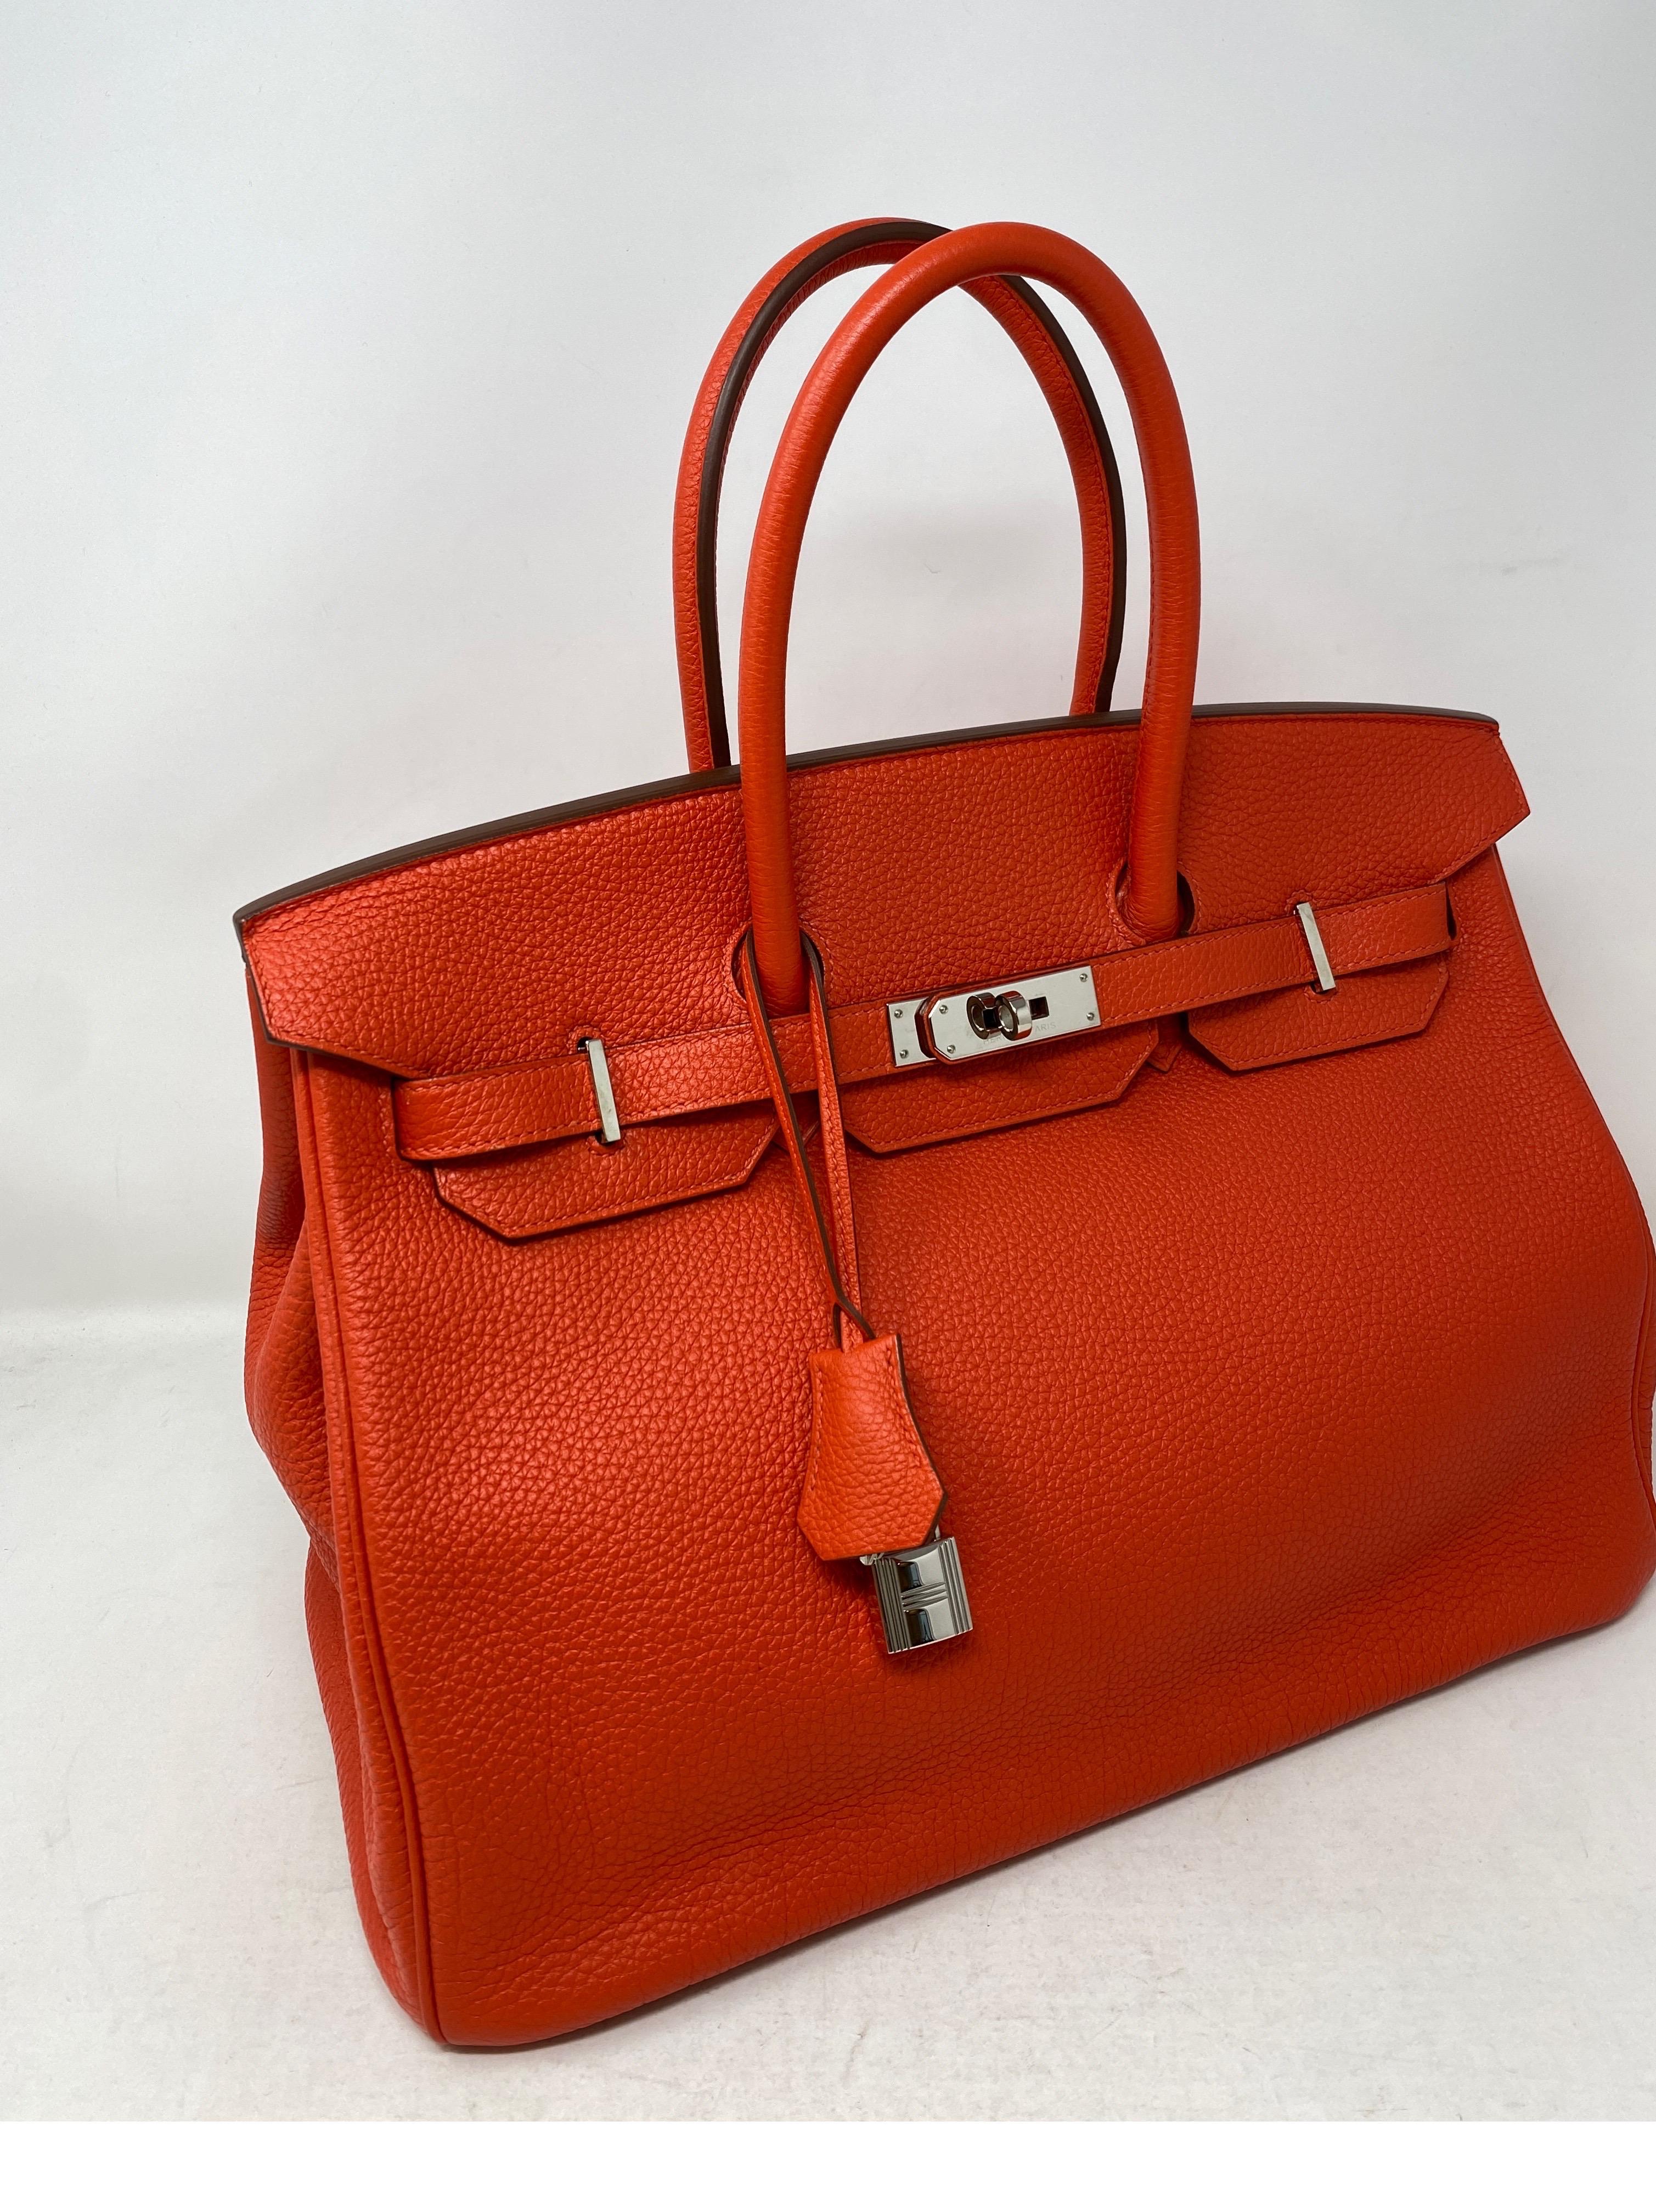 Hermes Capucine Orange Birkin 35 Bag. Excellent like new condition. Gorgeous bright orange/red color. Togo leather. Palladium hardware. Beautiful Birkin Bag. Includes clochette, lock, keys, and dust cover. Guaranteed authentic. 